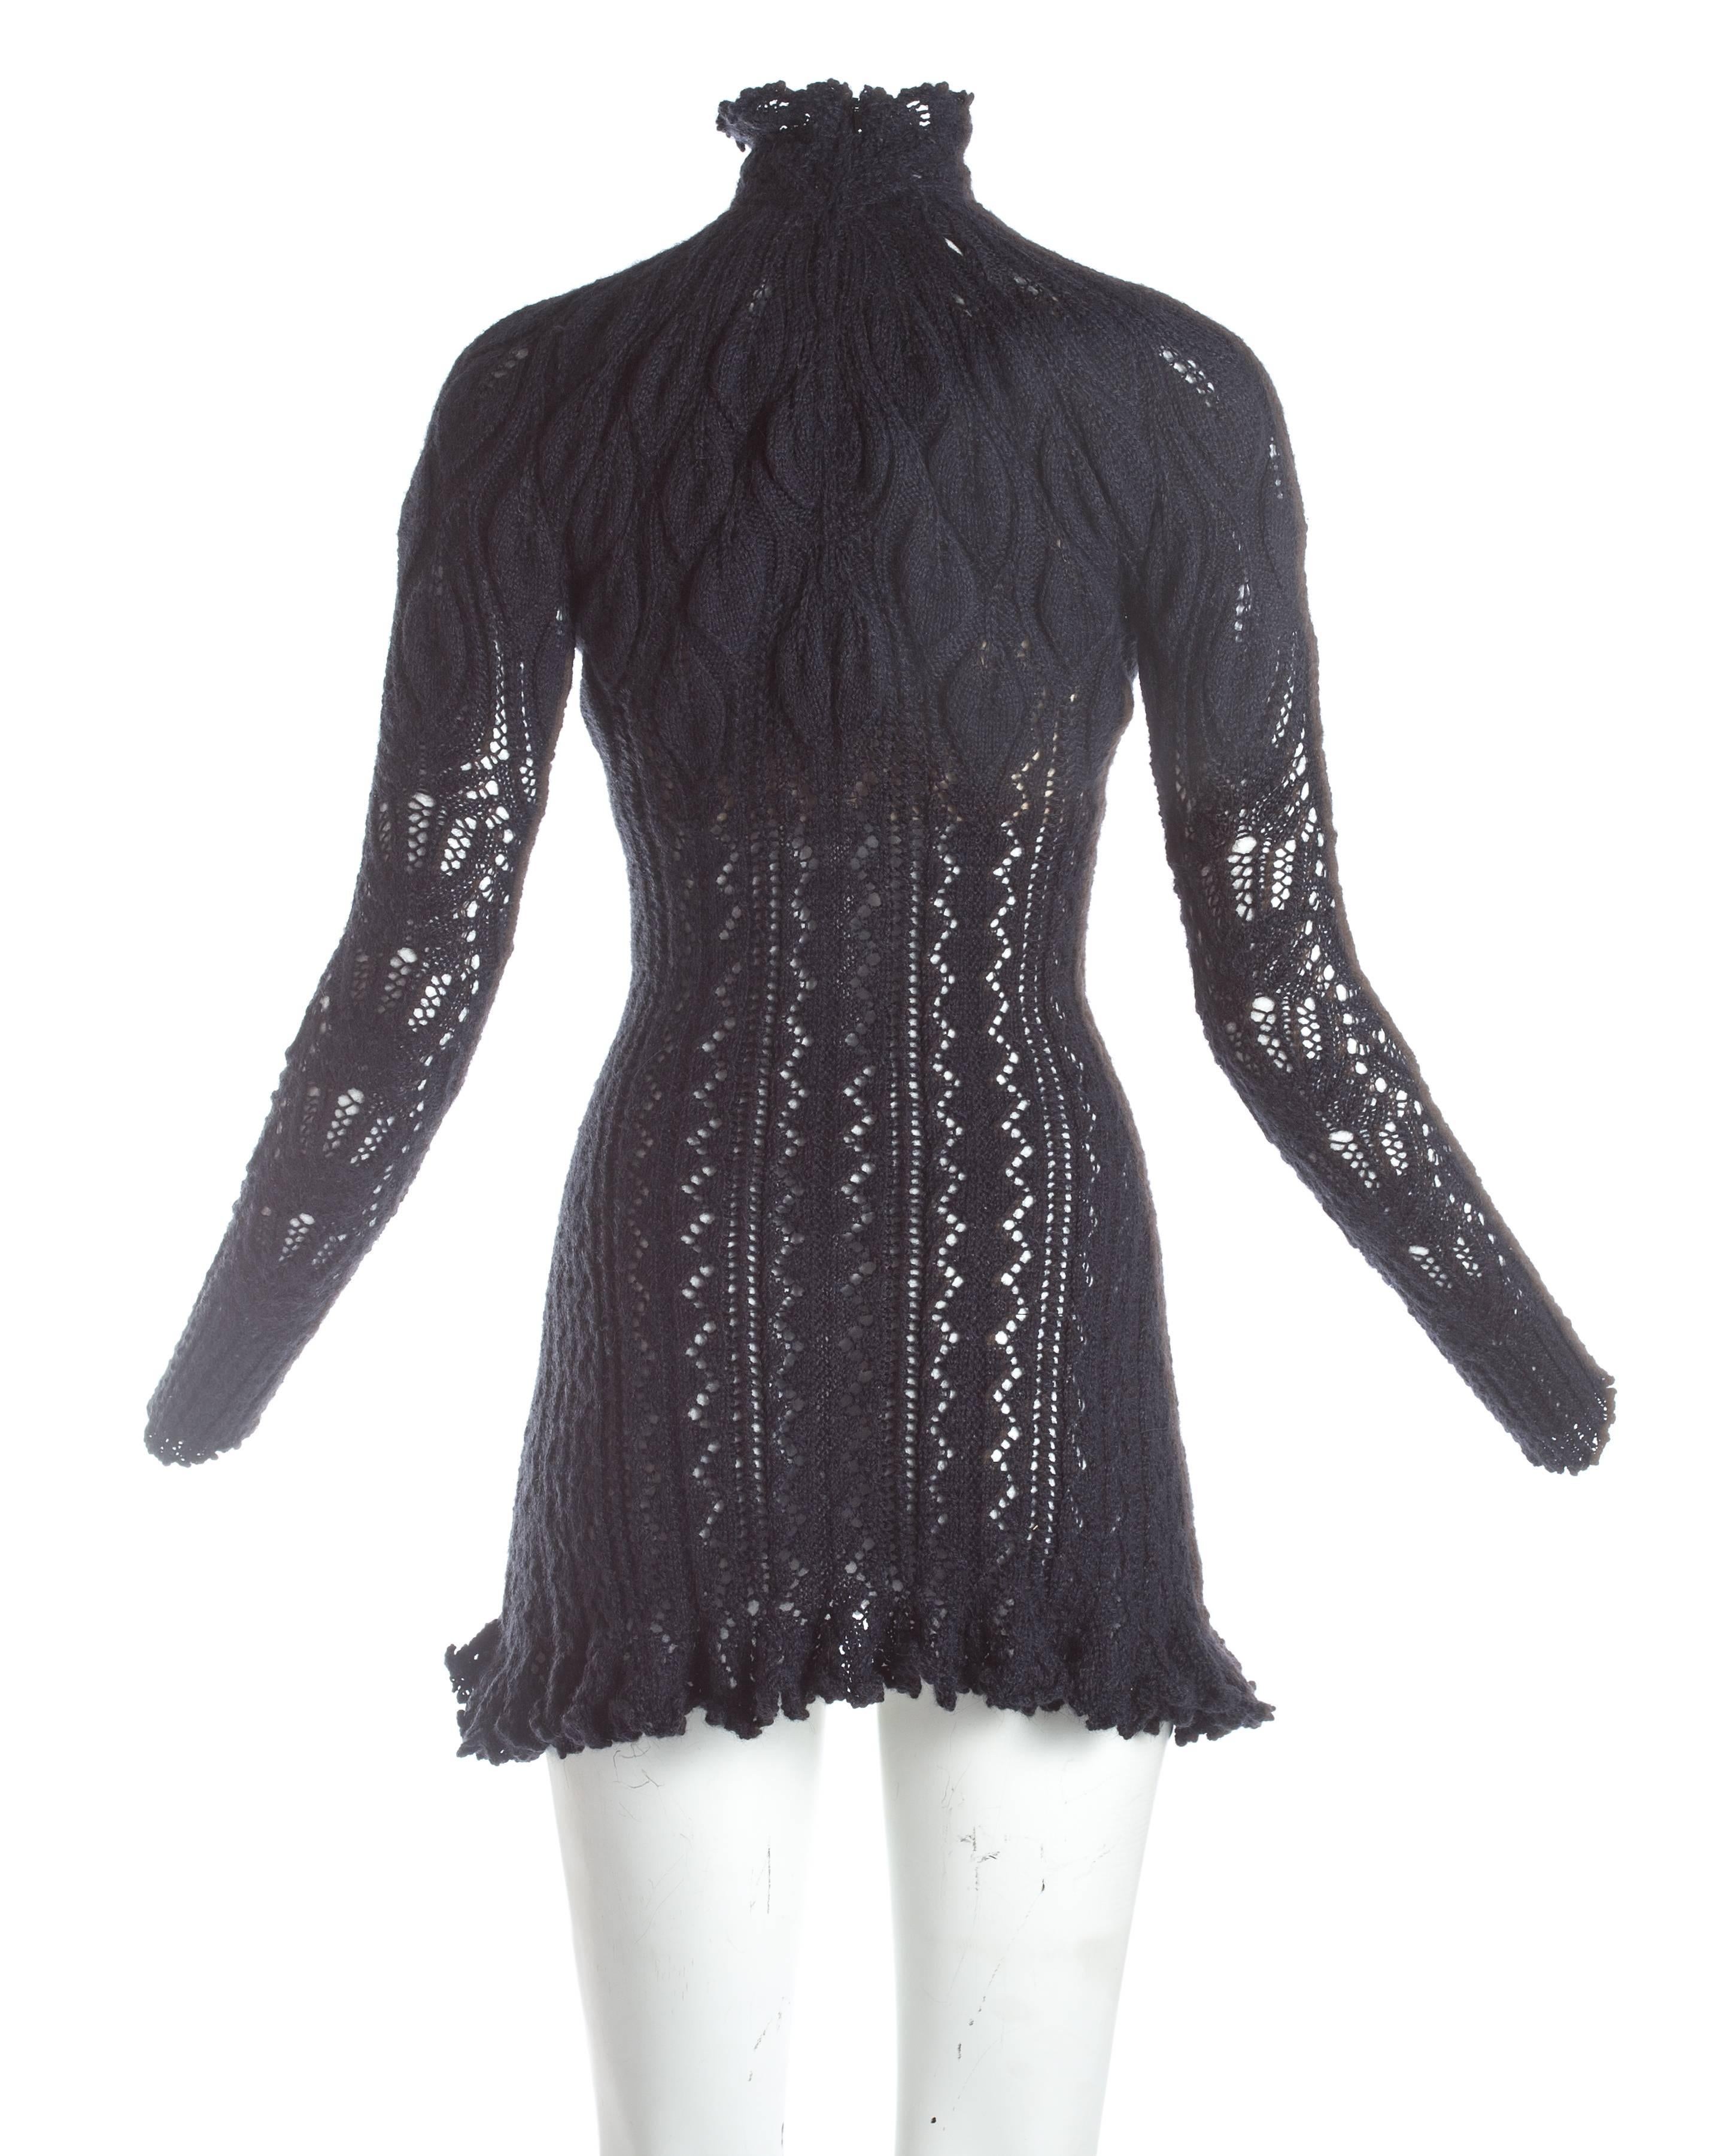 Black Vivienne Westwood knitted mini dress with internal corset, A / W 1993